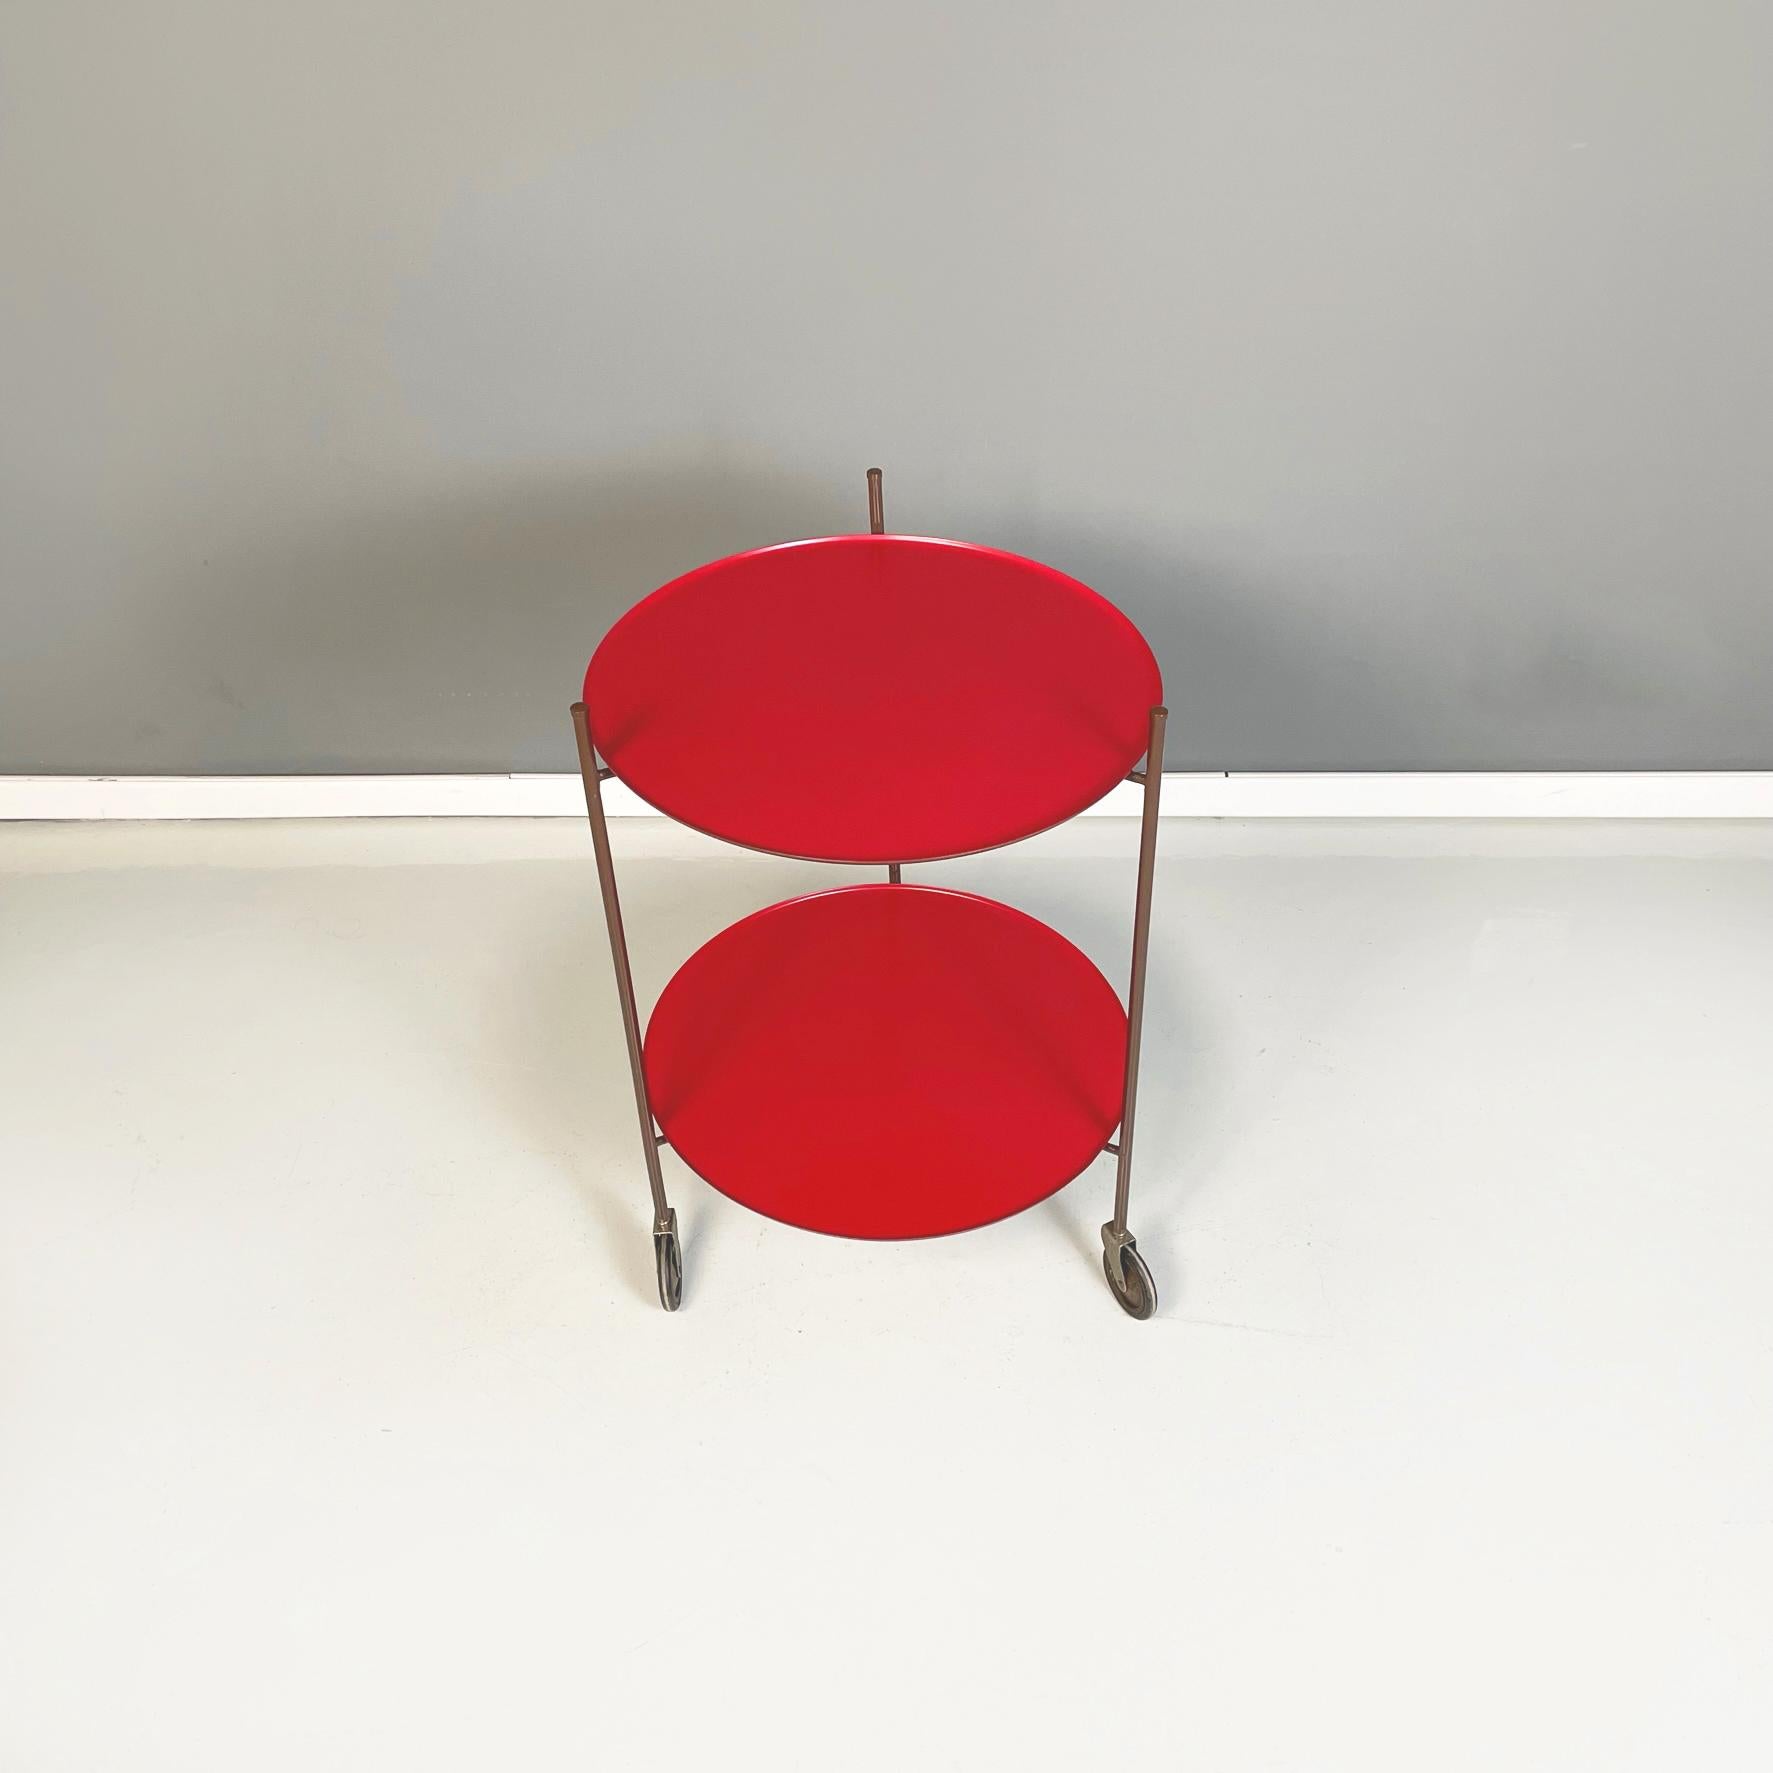 Late 20th Century Italian Modern Red and Brown Round Cart with Tubular Metal, 1970s